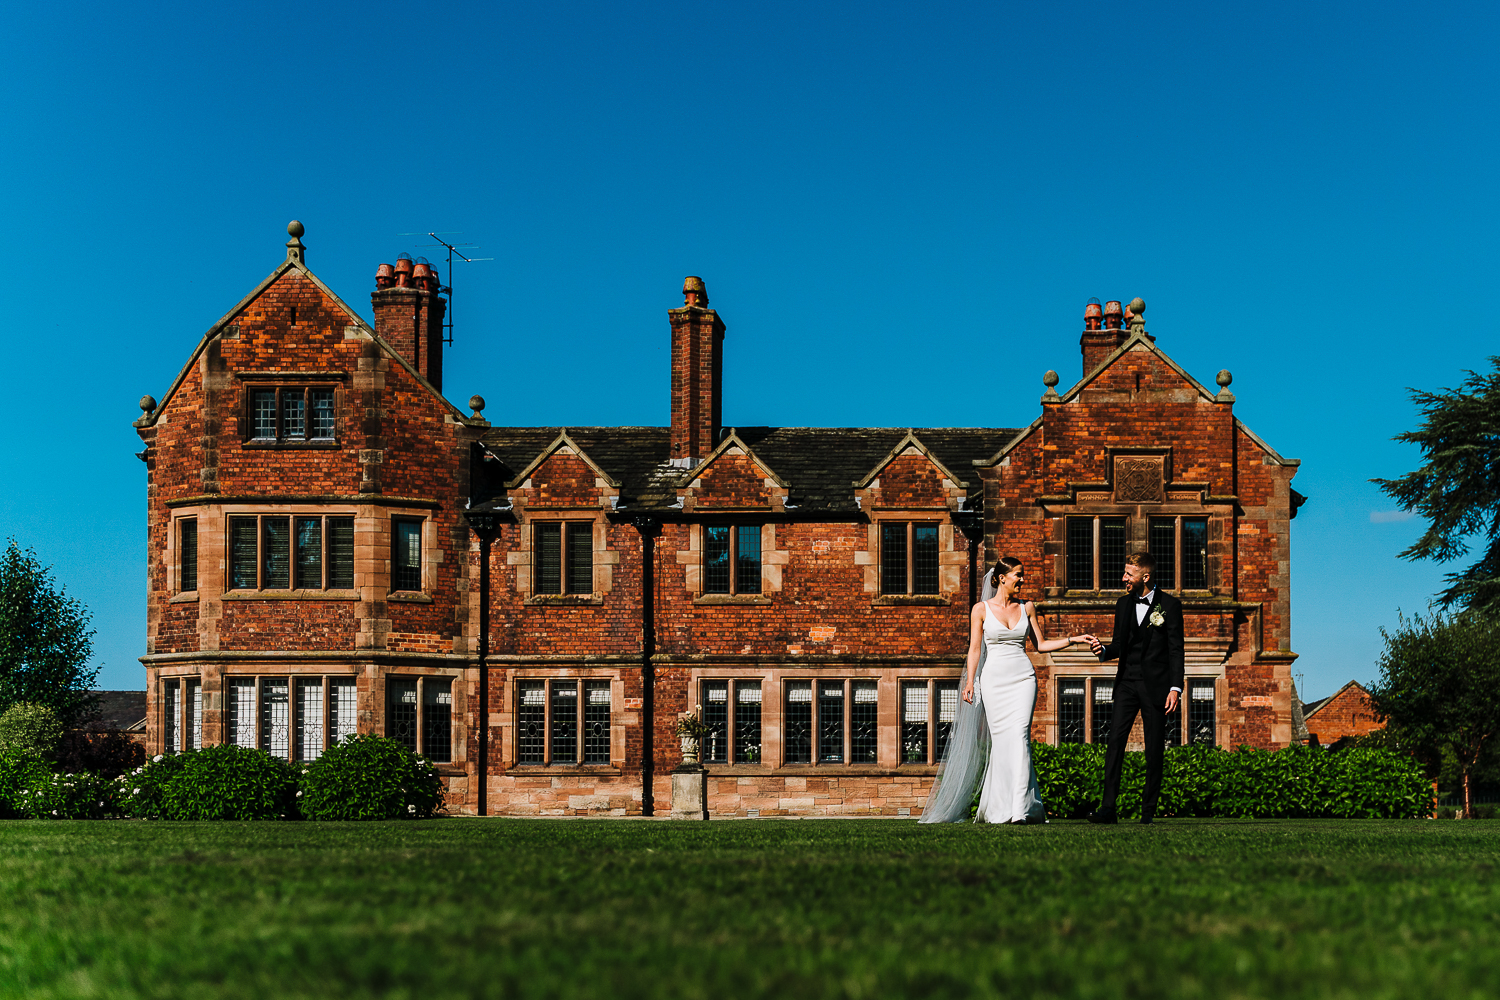 Couples photos at Colshaw Hall